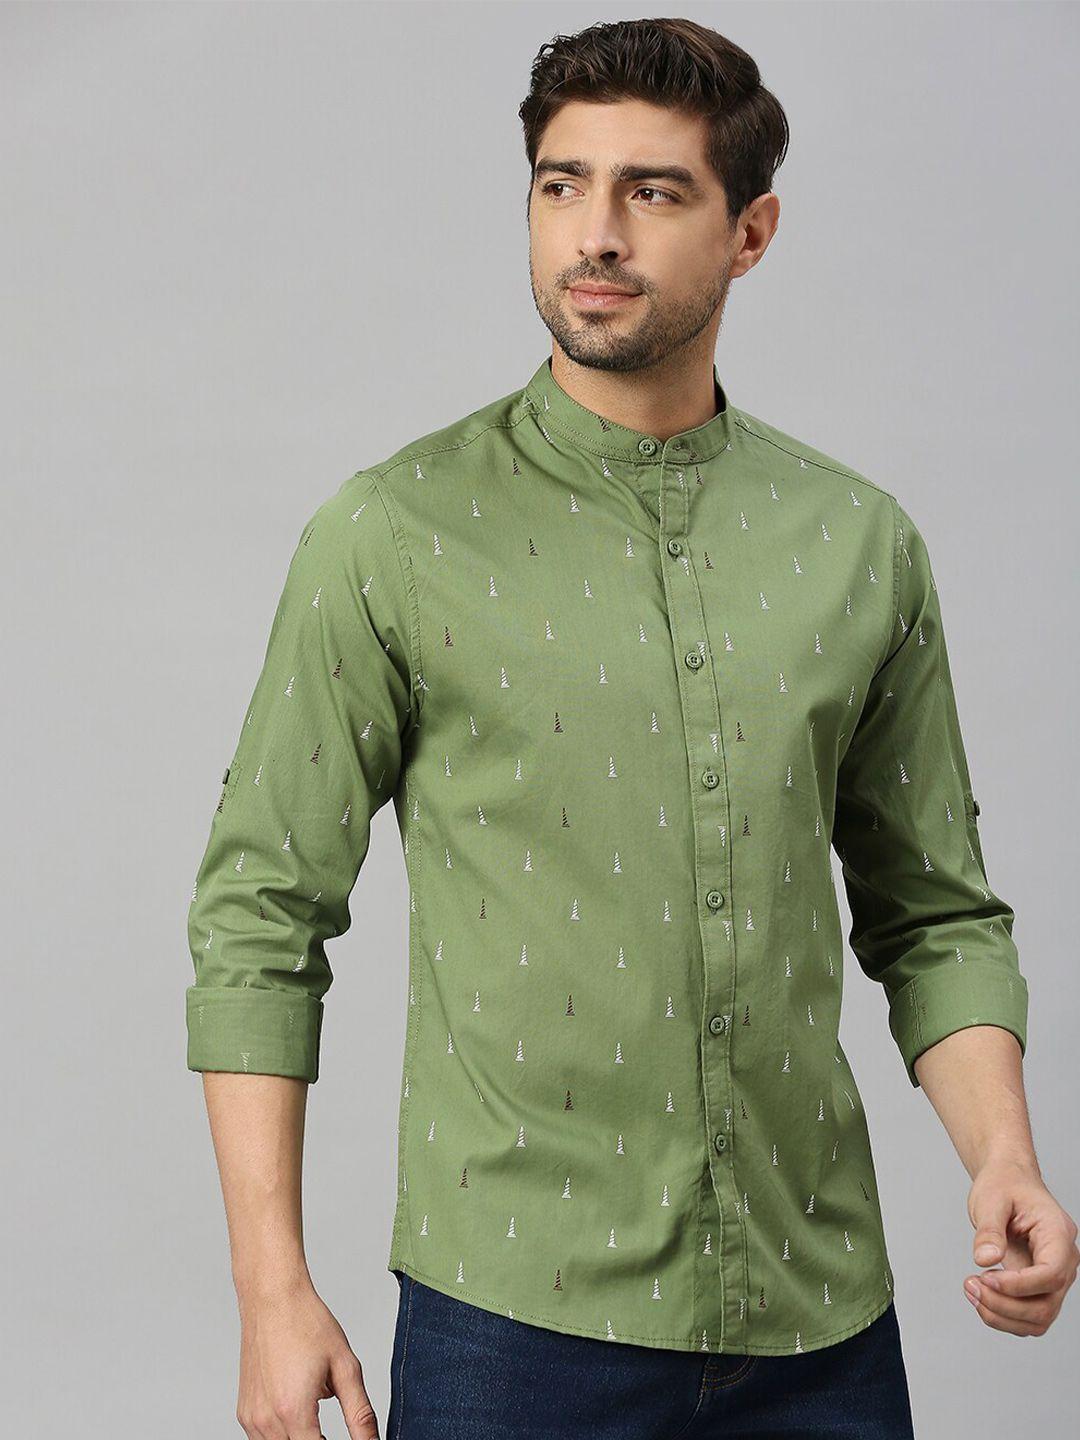 here&now green classic slim fit micro ditsy printed pure cotton casual shirt